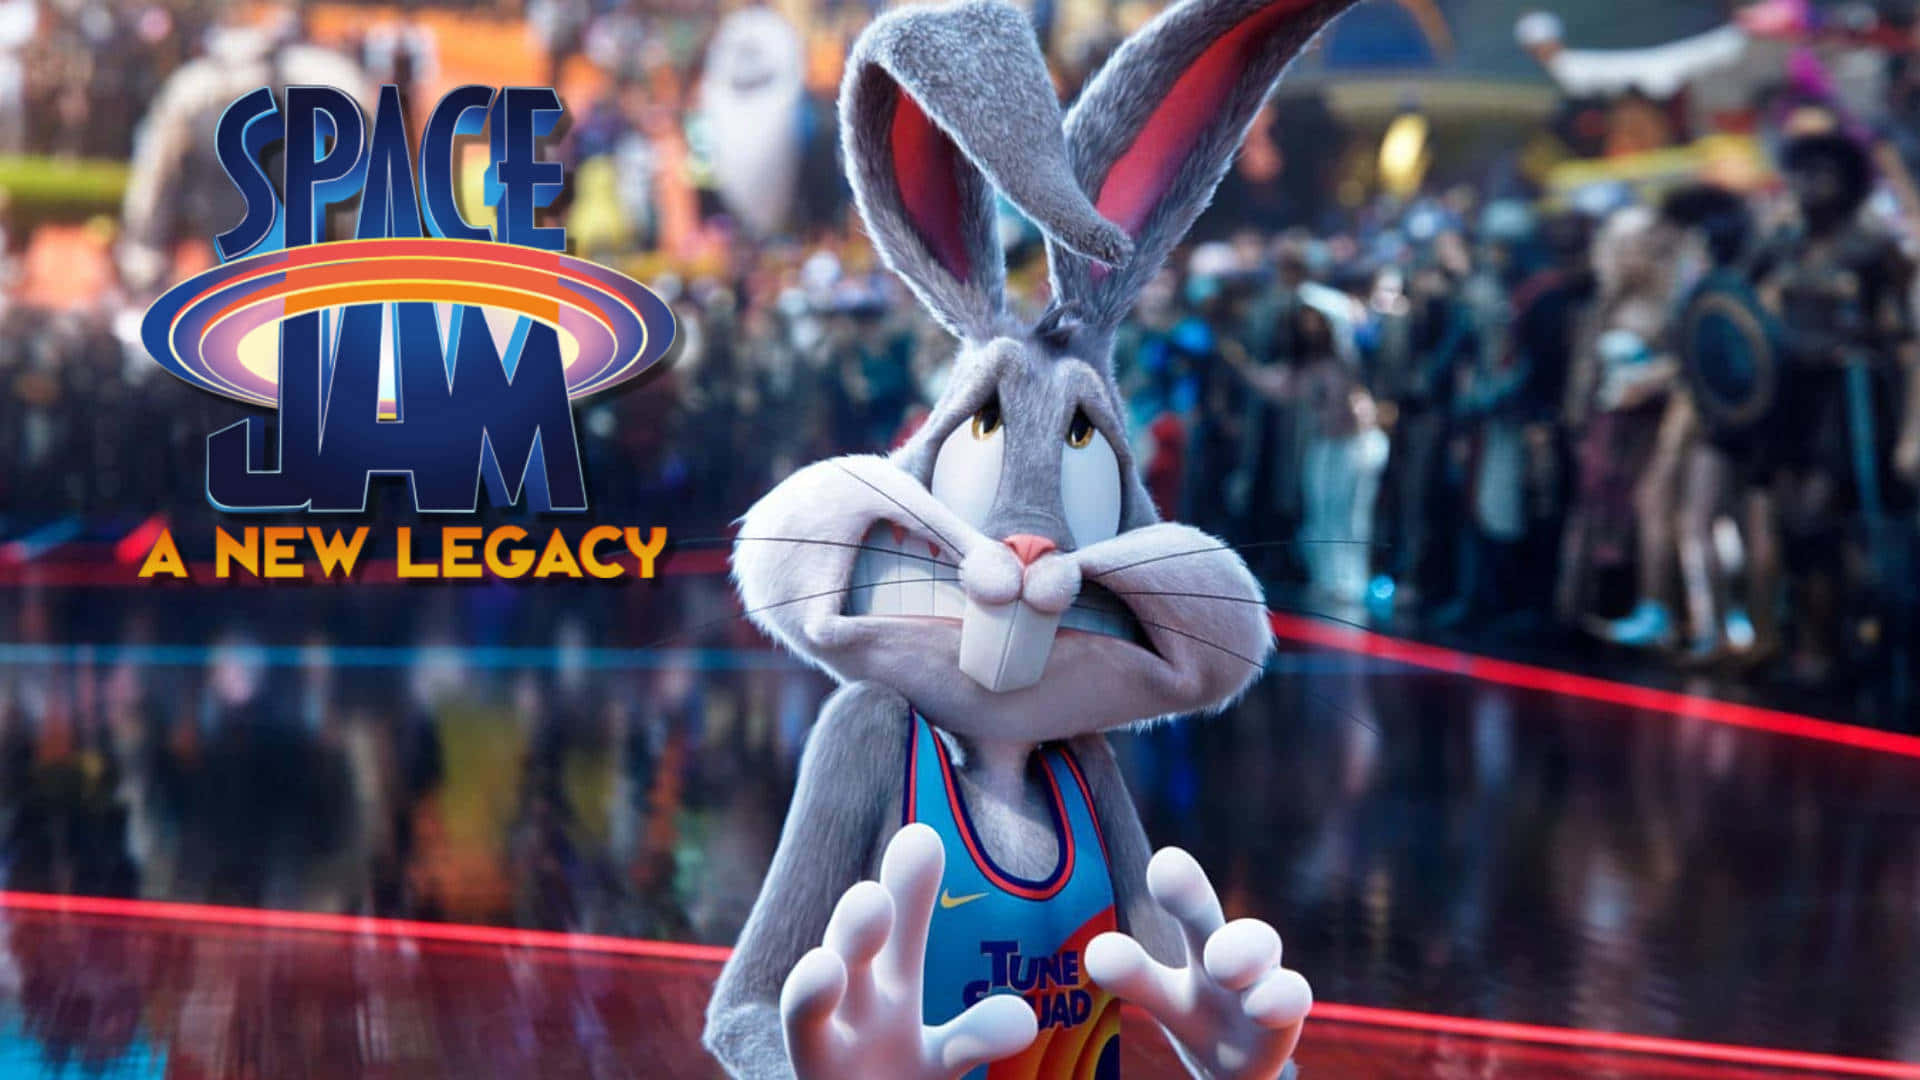 Bugsbunny Cooles Space Jam: A New Legacy Wallpaper